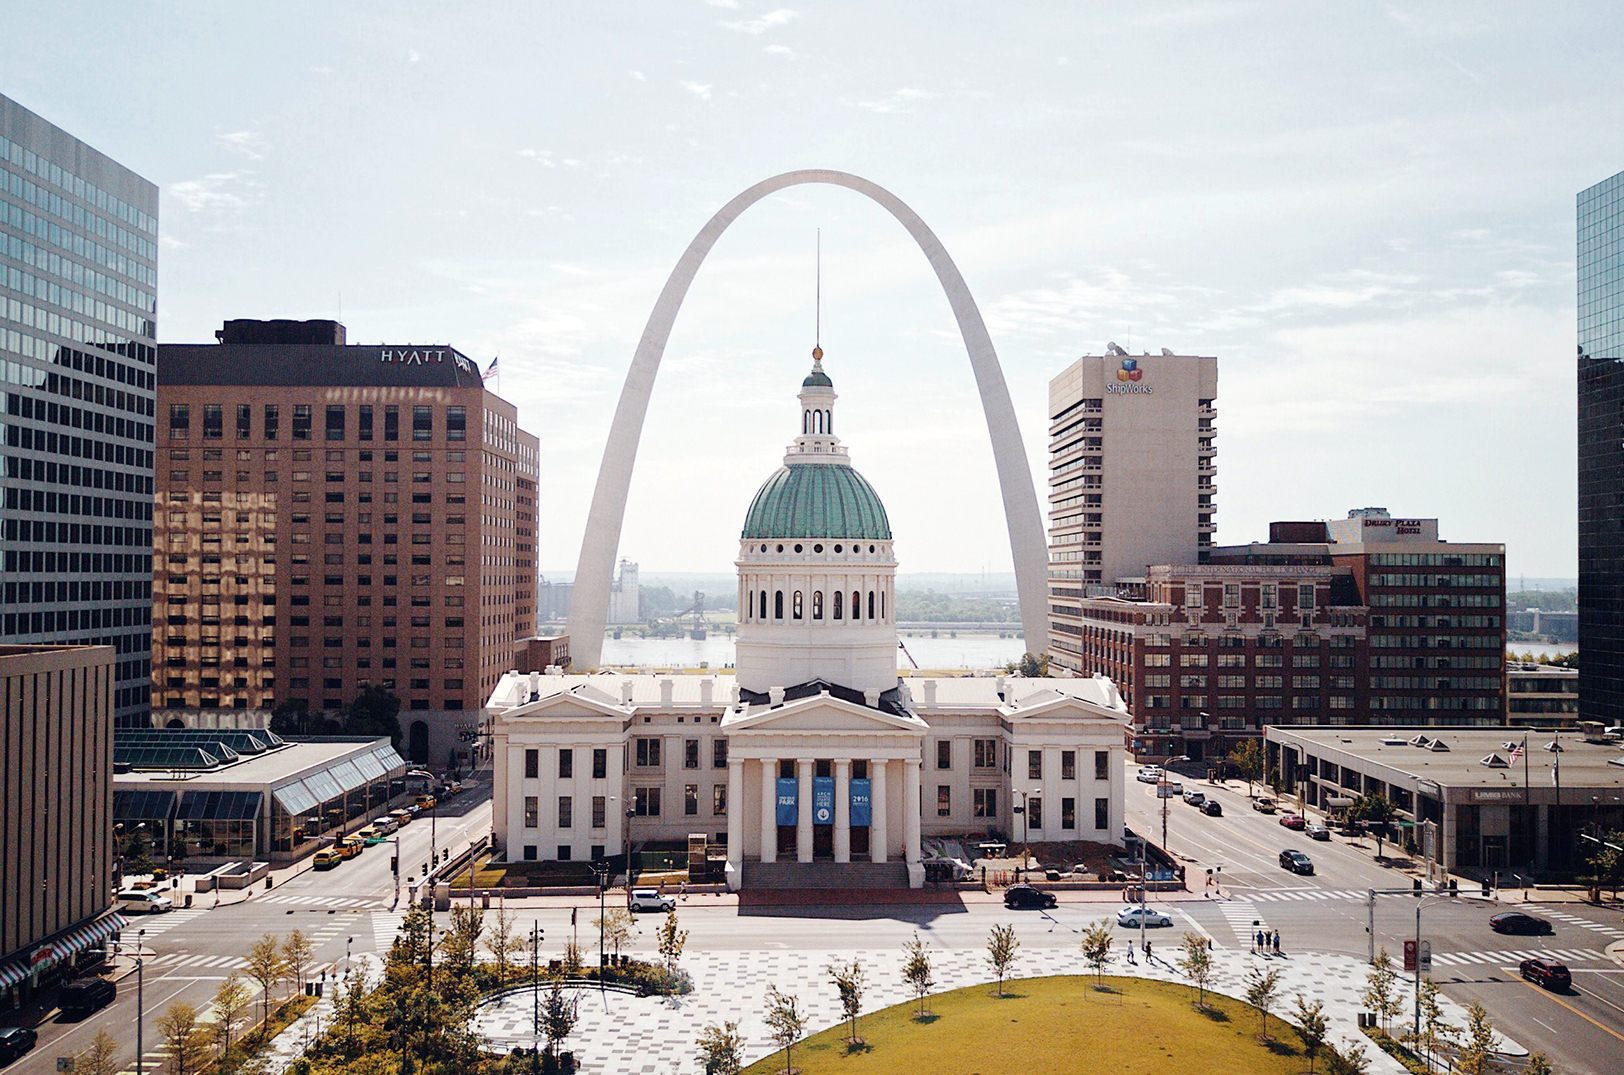 Reports: St. Louis startup scene surging while KC struggles to keep pace with past wins